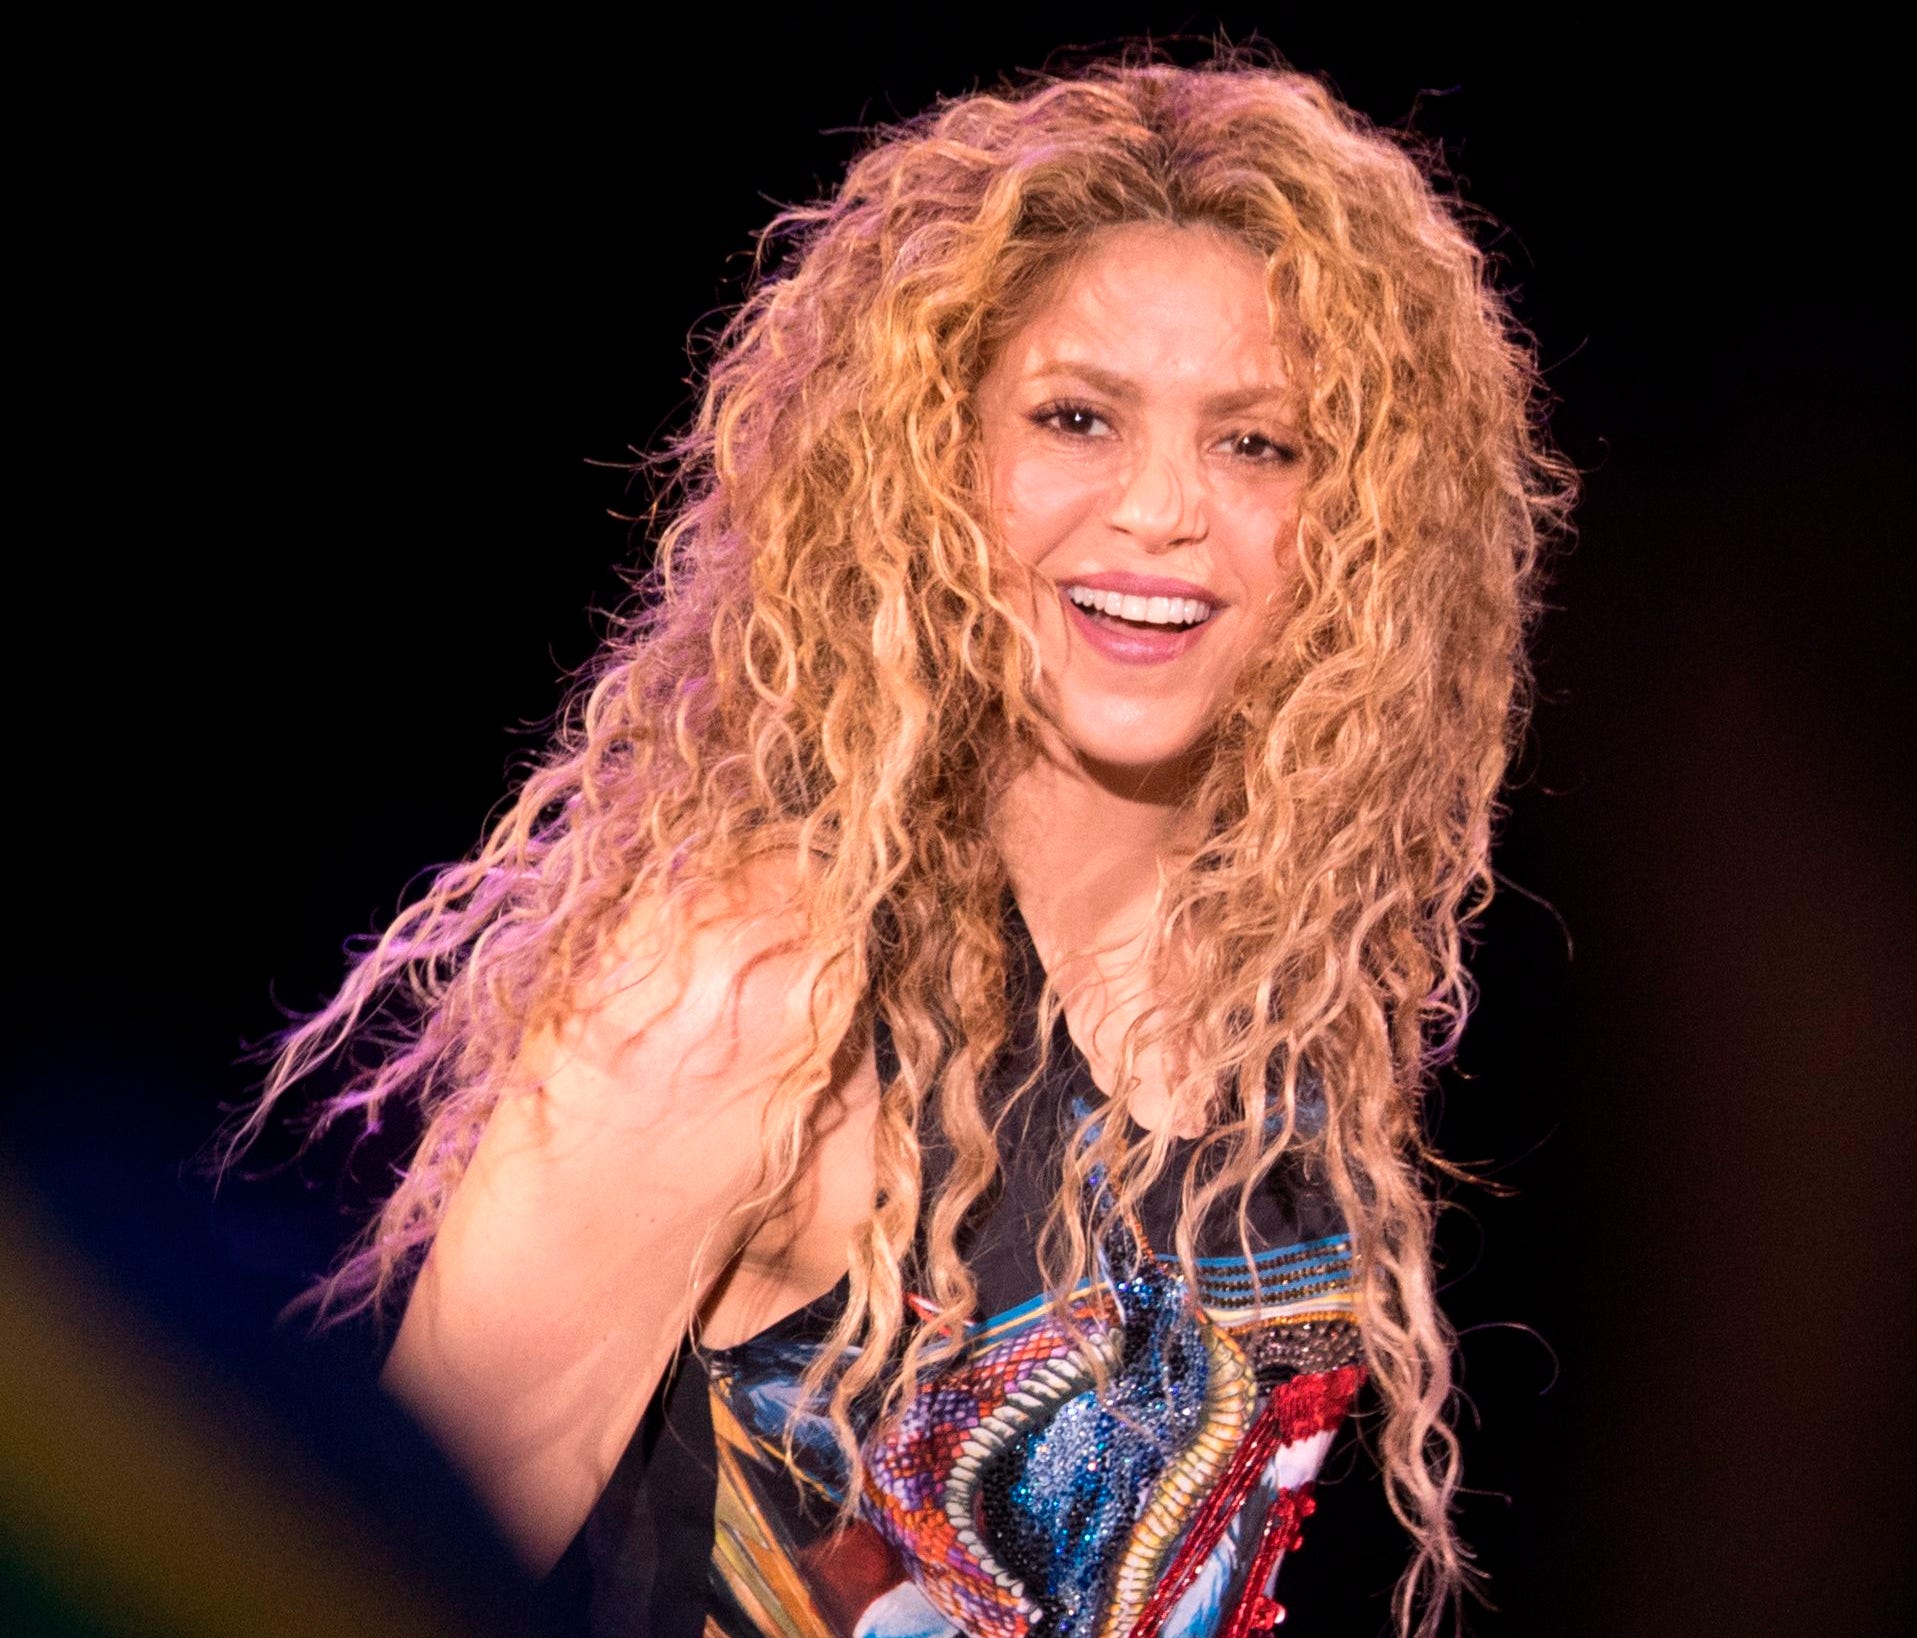 Colombian singer Shakira performs on stage at the Bercy Accordhotels Arena in Paris on June 13, 2018 at the Accor Arena in Paris.